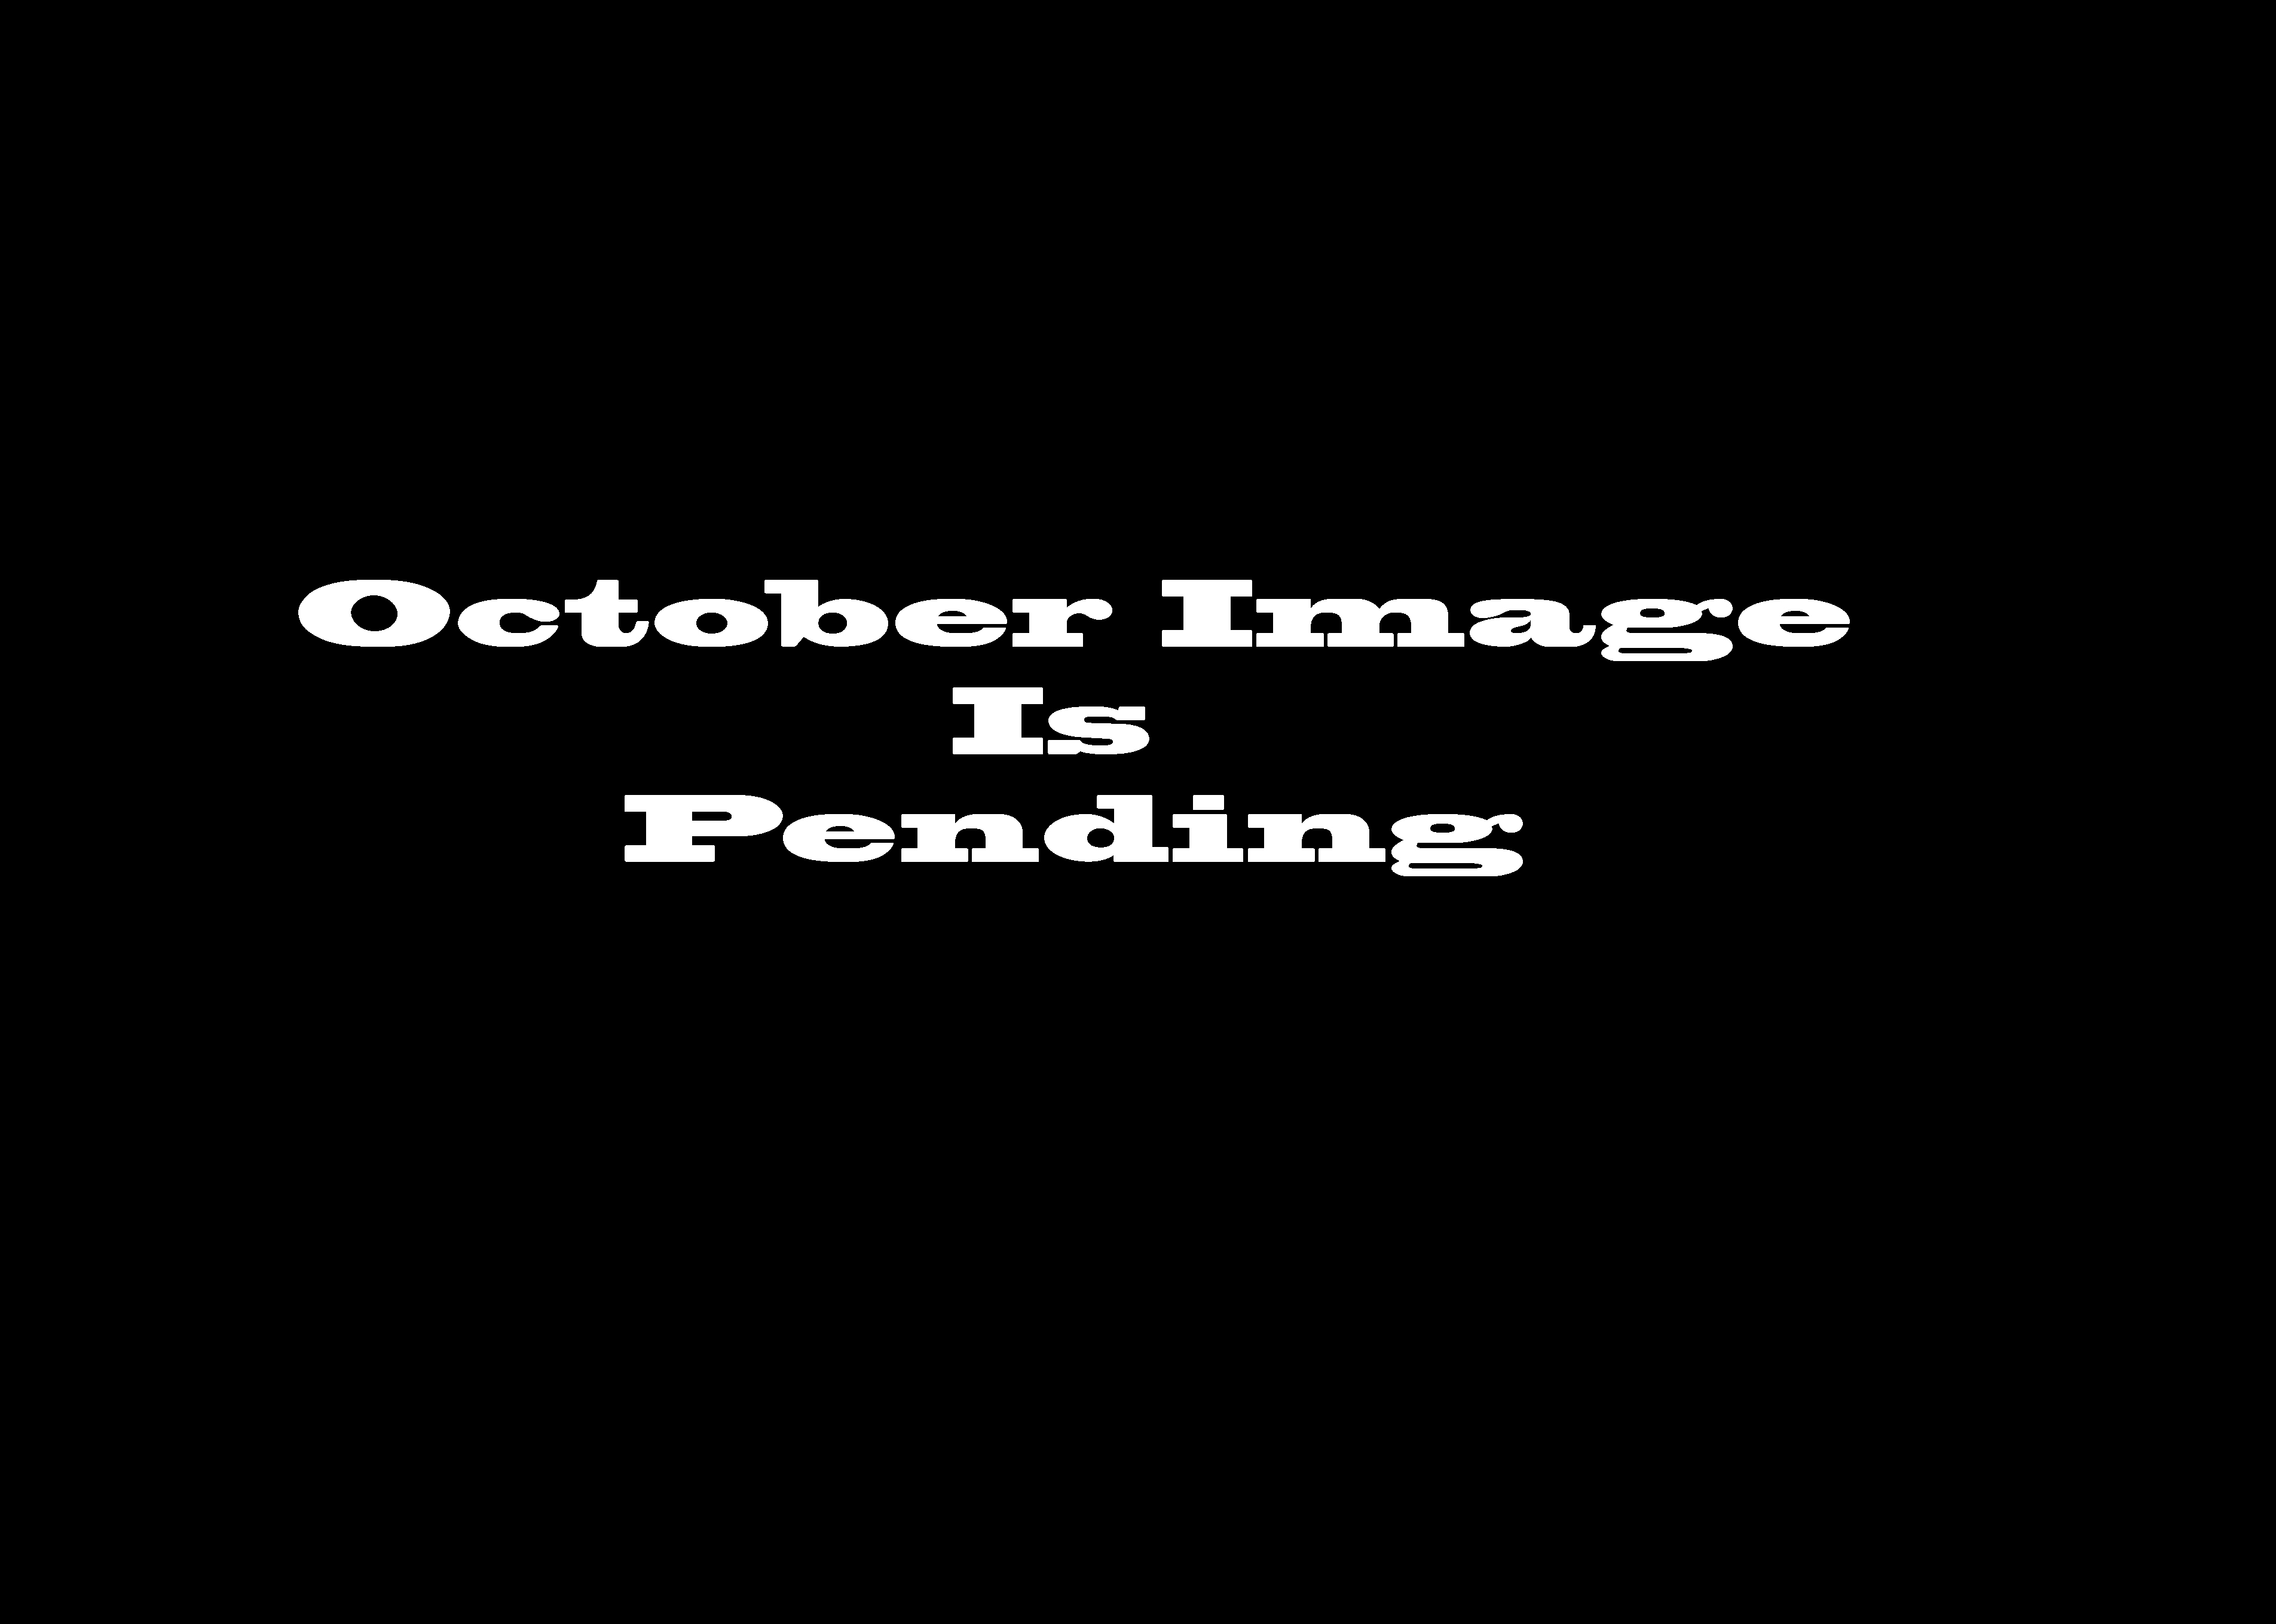 pending by Bud Ralston